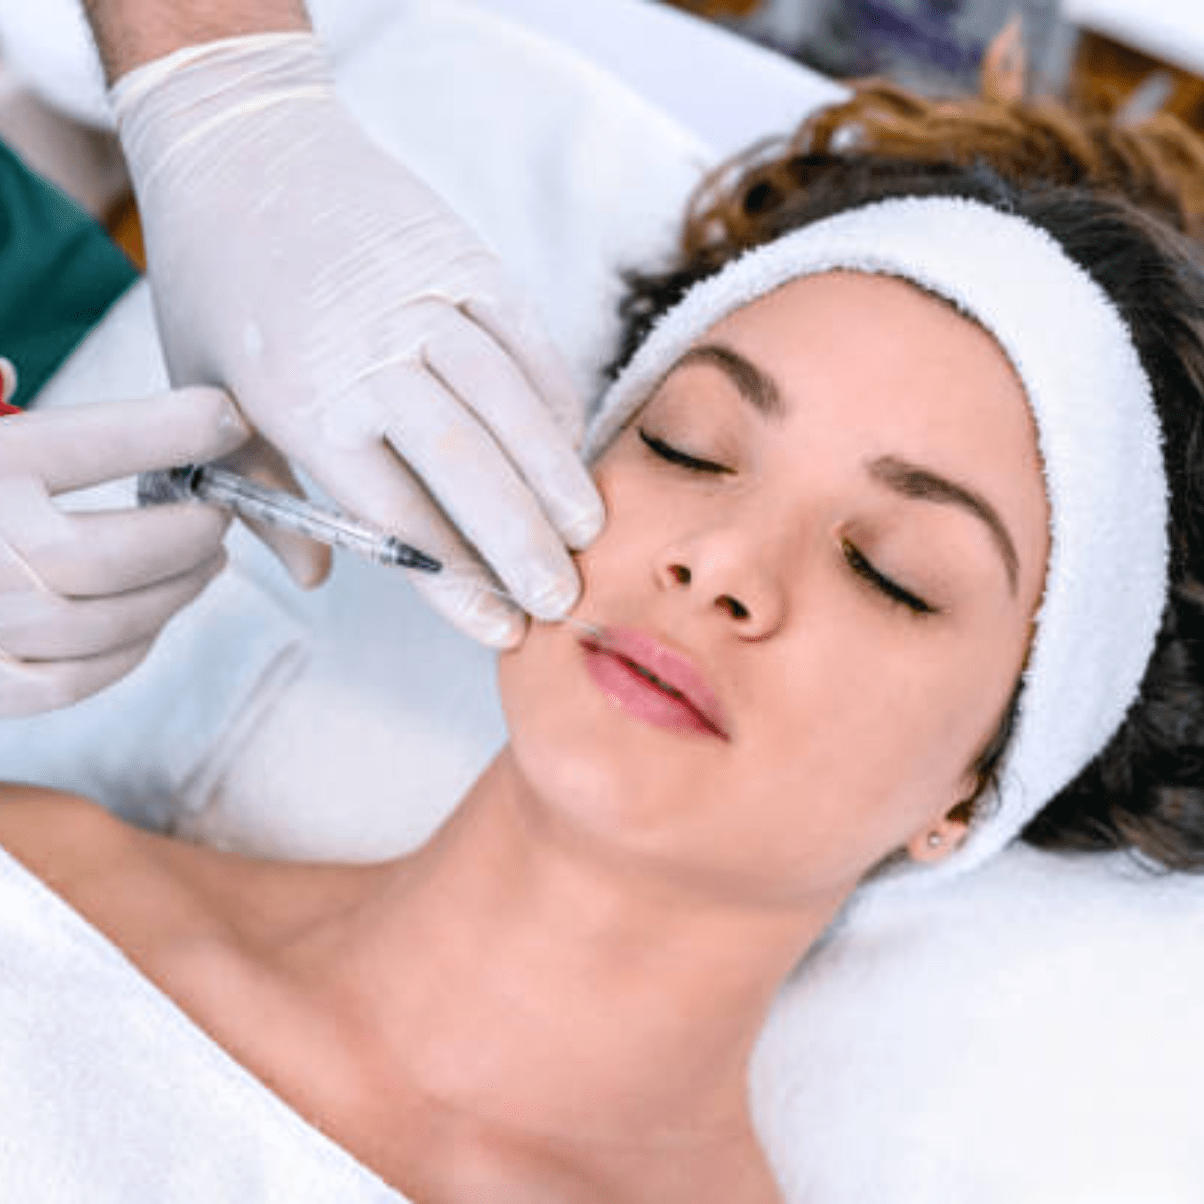 a person is getting their face done by an aesthetician